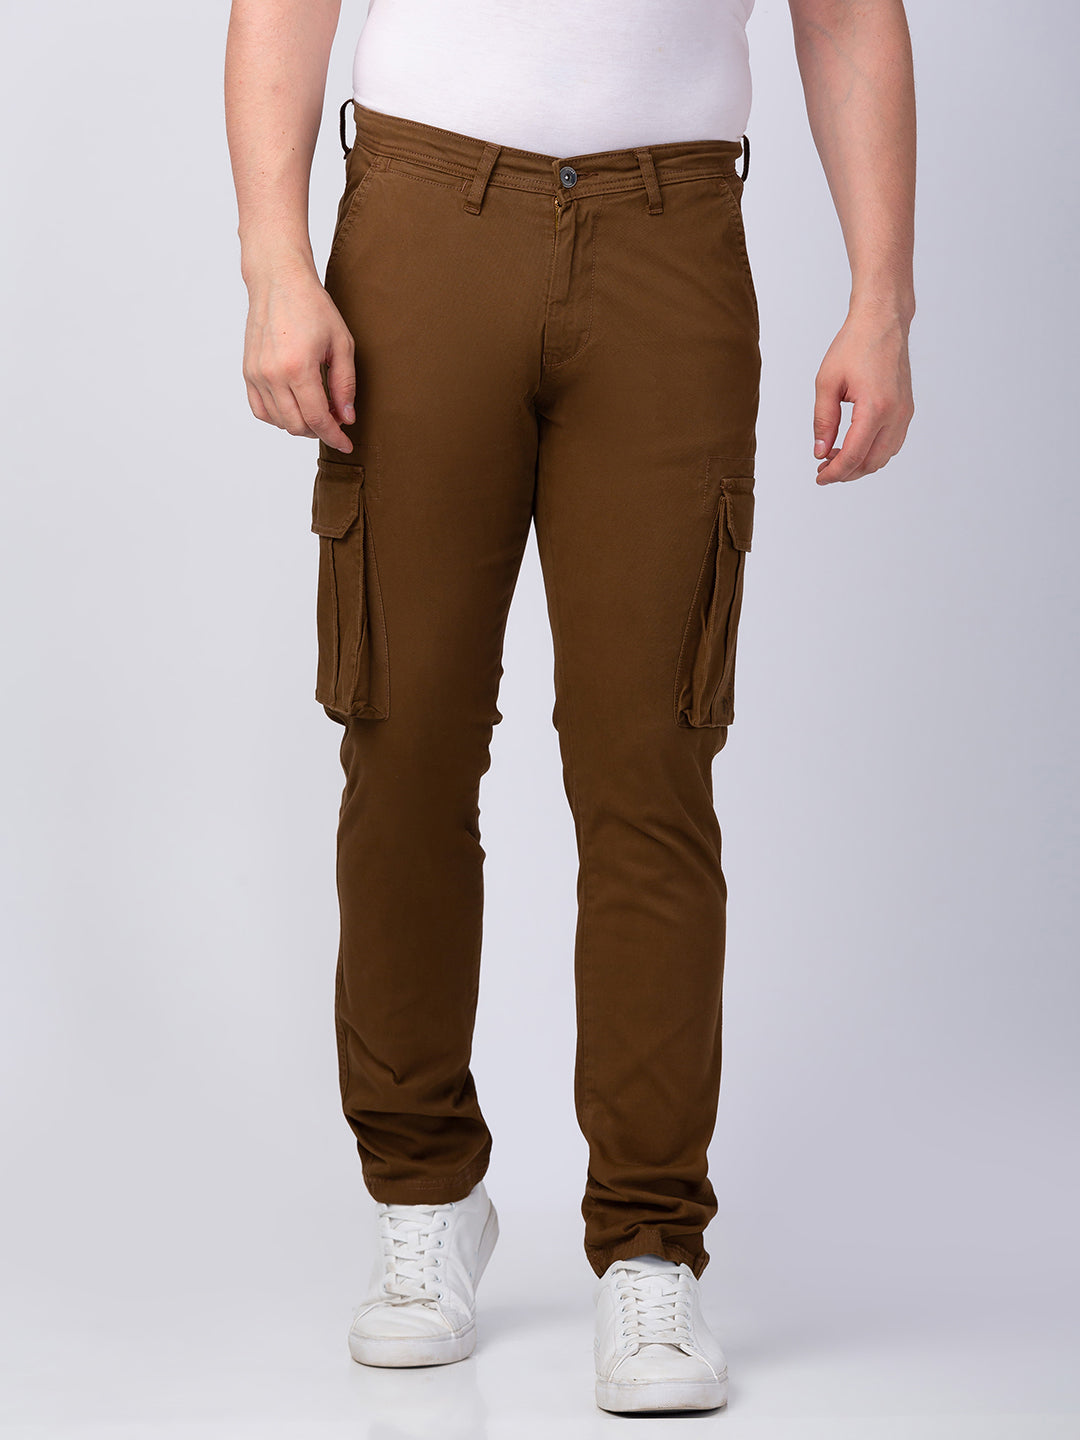 Black Relax Fit Ankle Length Nylon Cargo Pant  Flynoff